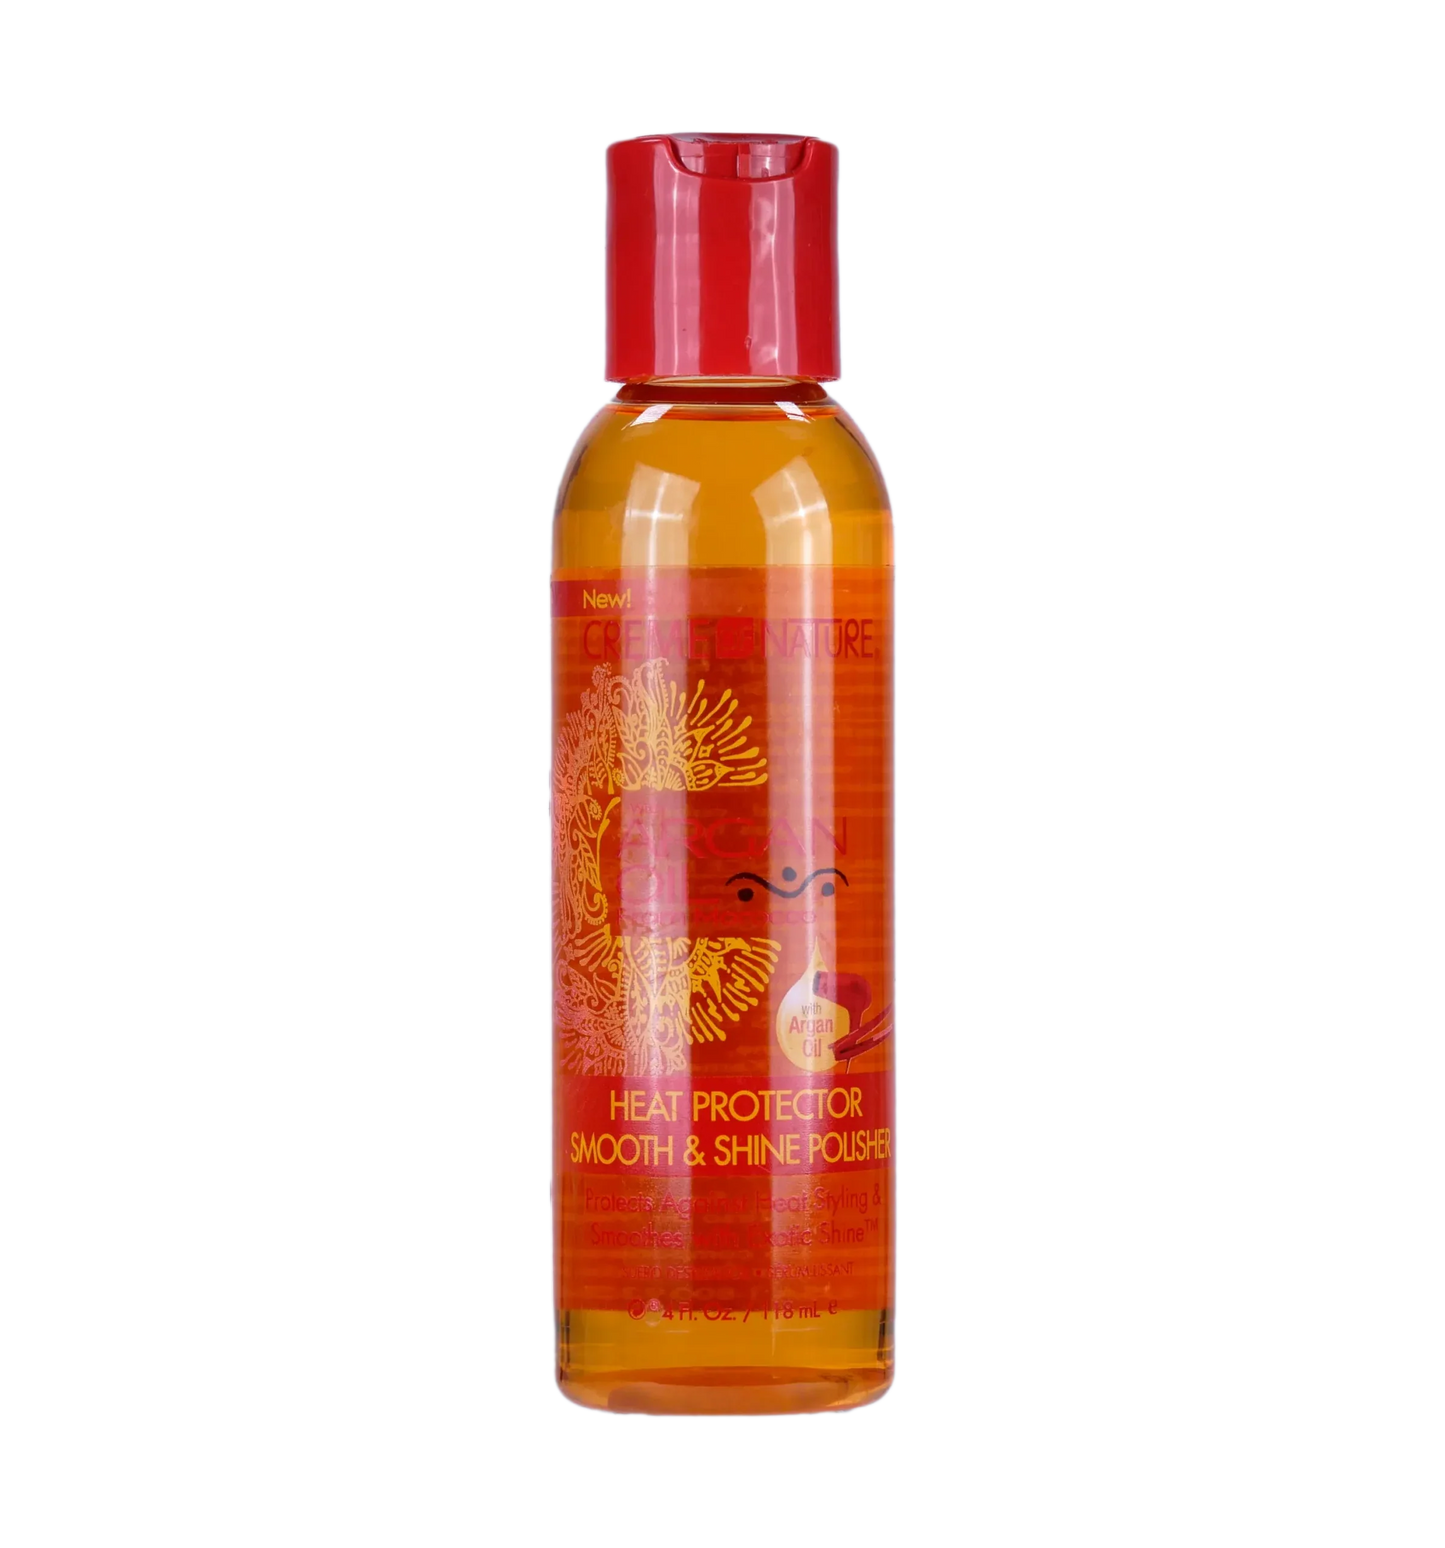 Creme of Nature Argan Oil Heat Protector Smooth & Shine Polisher